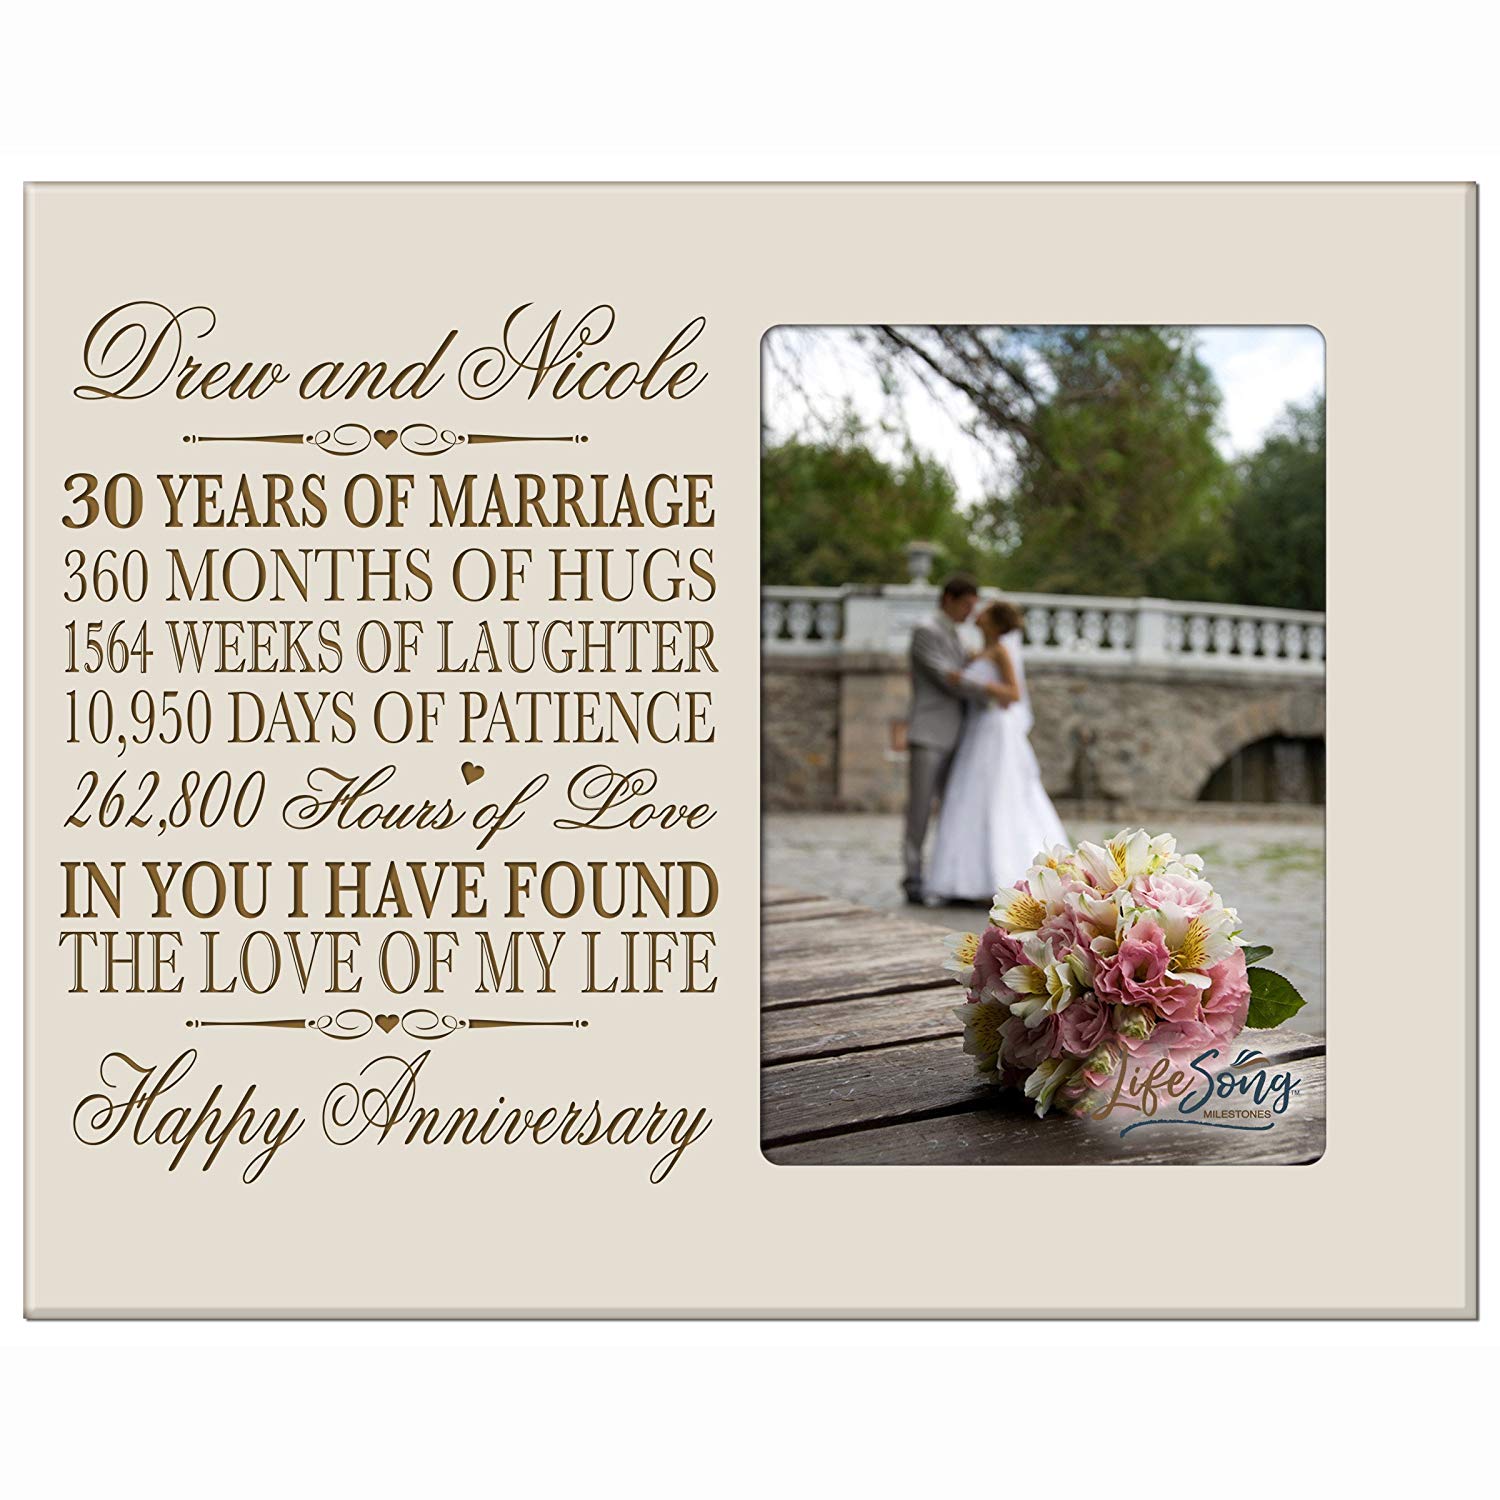 Personalized Couples 30th Wedding Anniversary Picture Frame Decorations - In You I Have Found - LifeSong Milestones